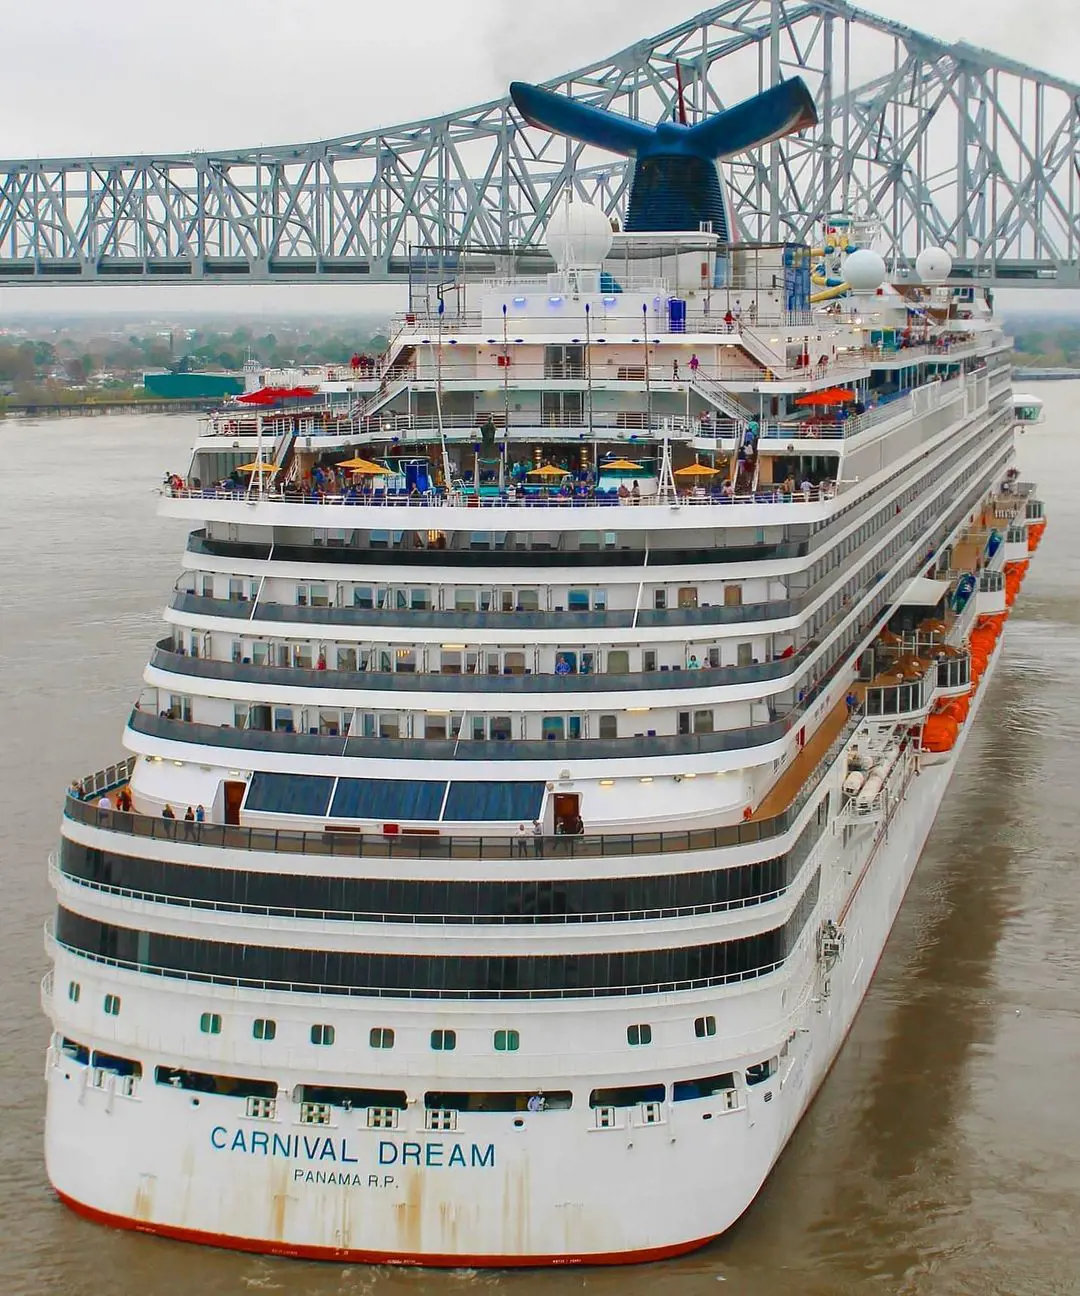 Carnival Dream departing from New Orleans.